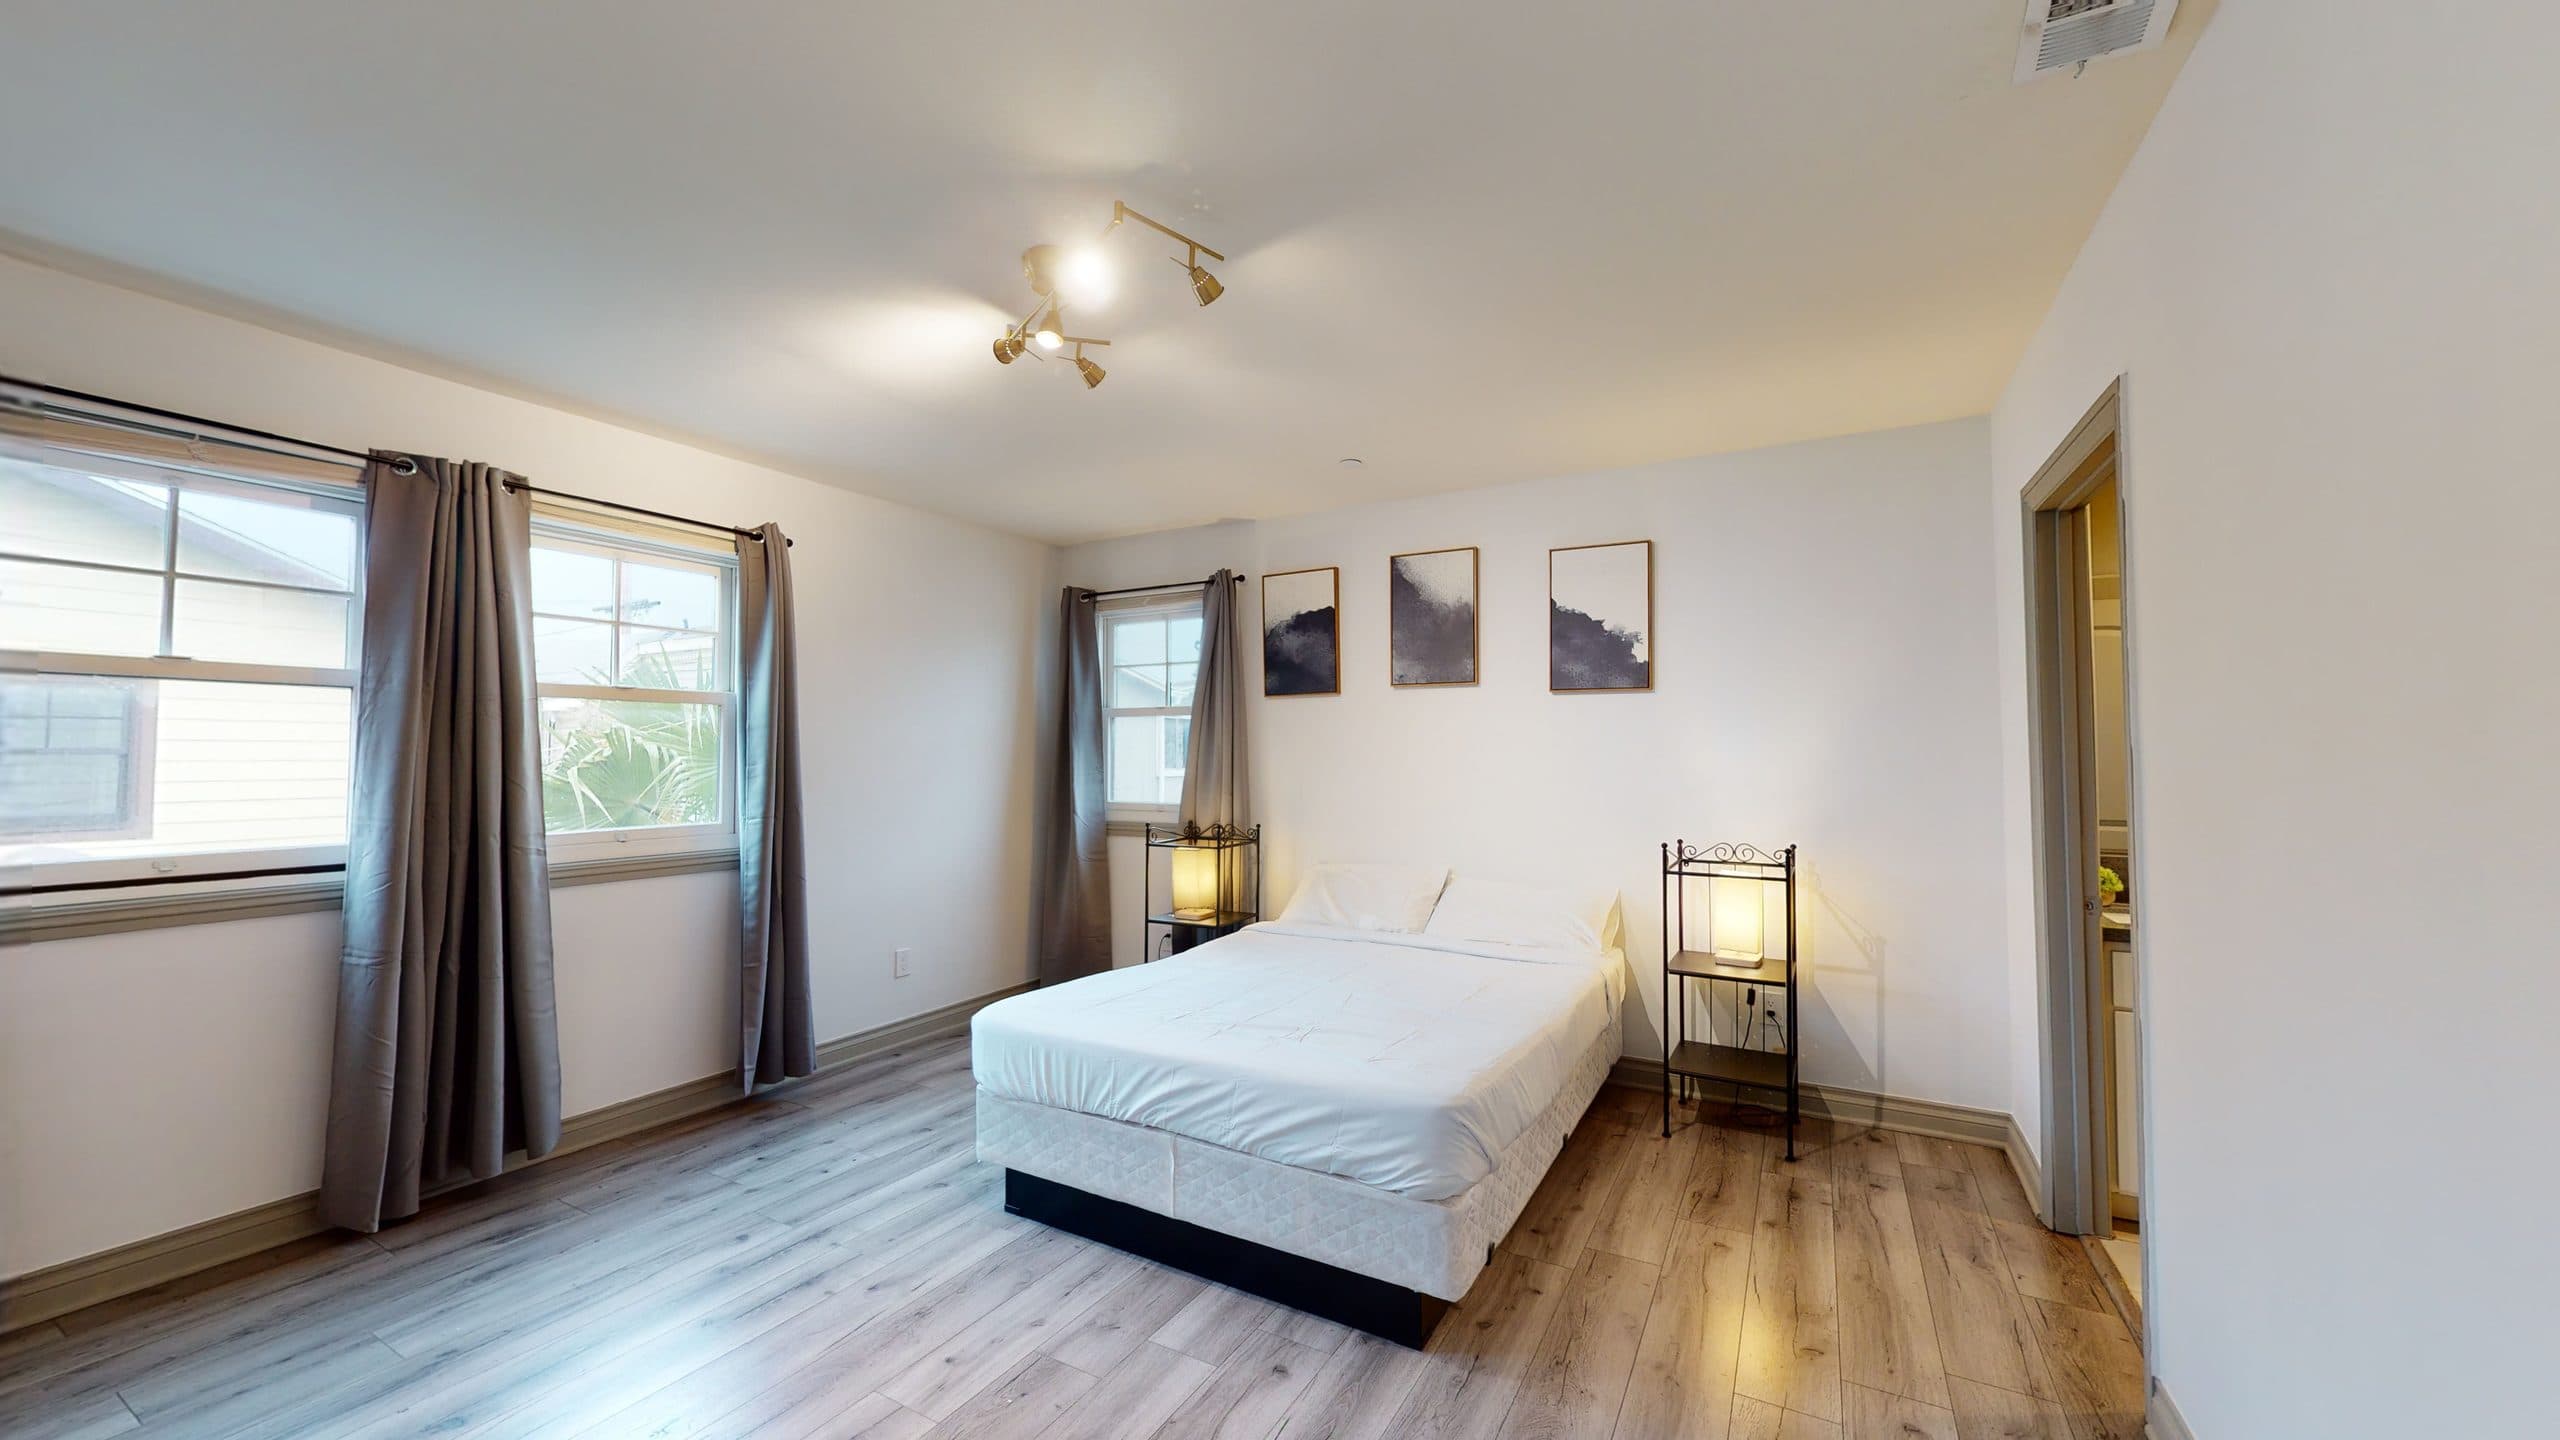 Photo 19 of #2280: Queen Bedroom A at June Homes